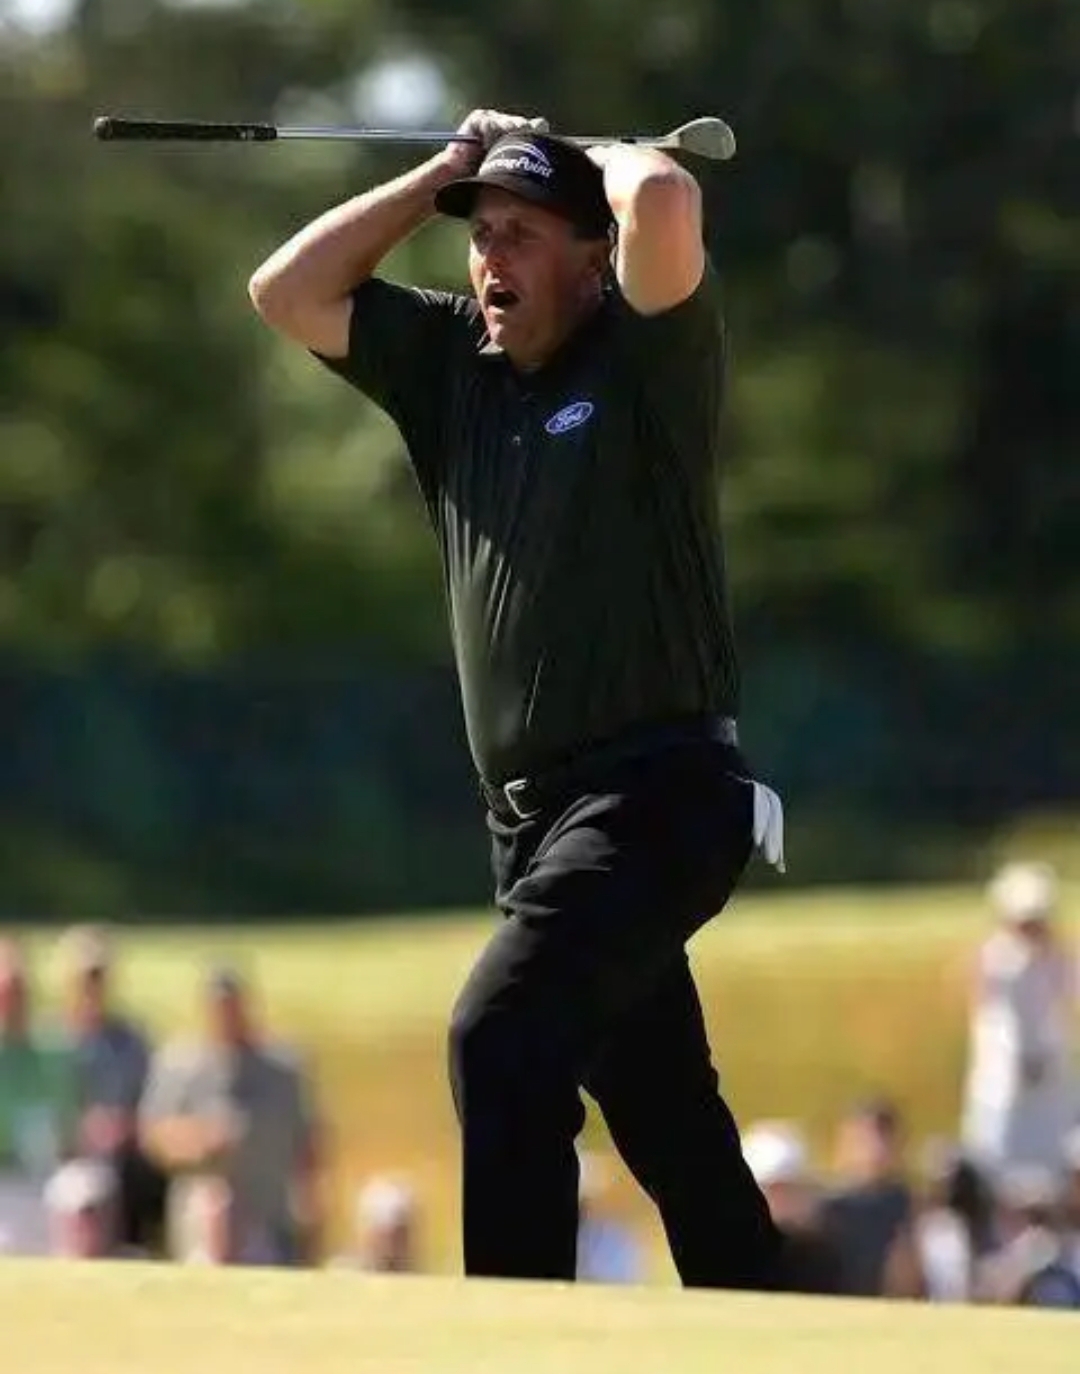 Breaking News: Phil Mickelson had been suspended from Liv golf for……see more